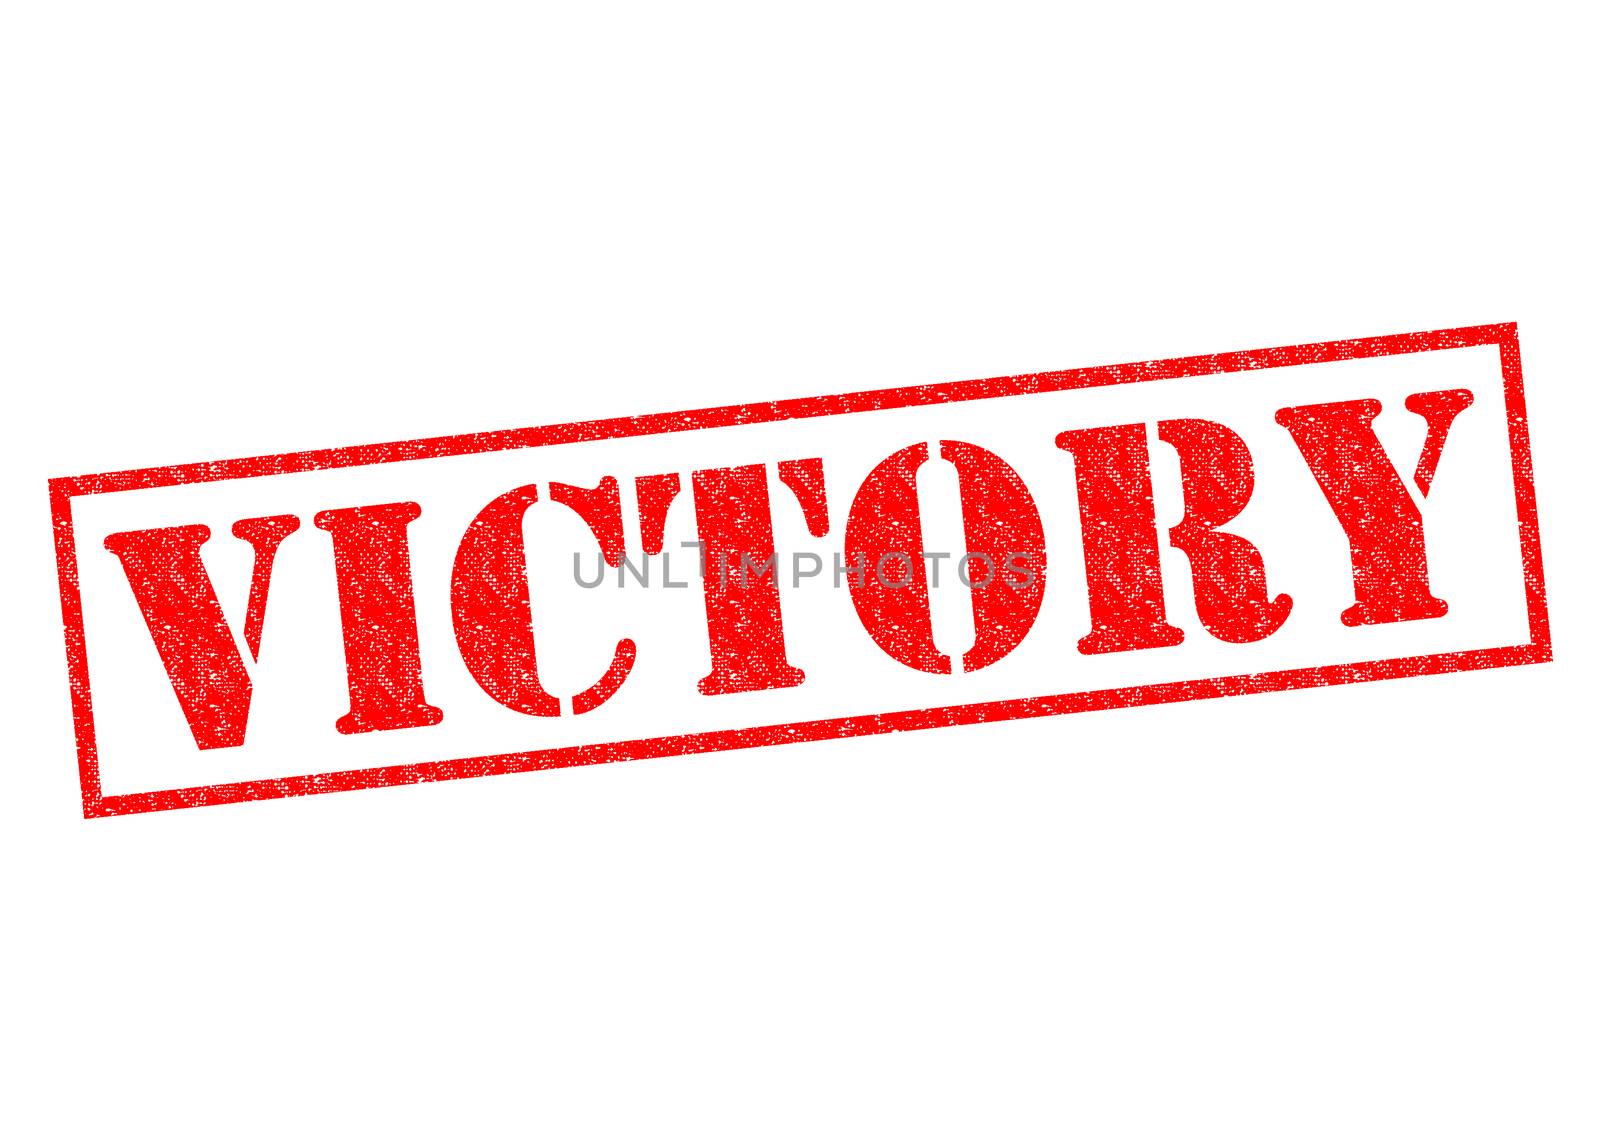 VICTORY red Rubber Stamp over a white background.